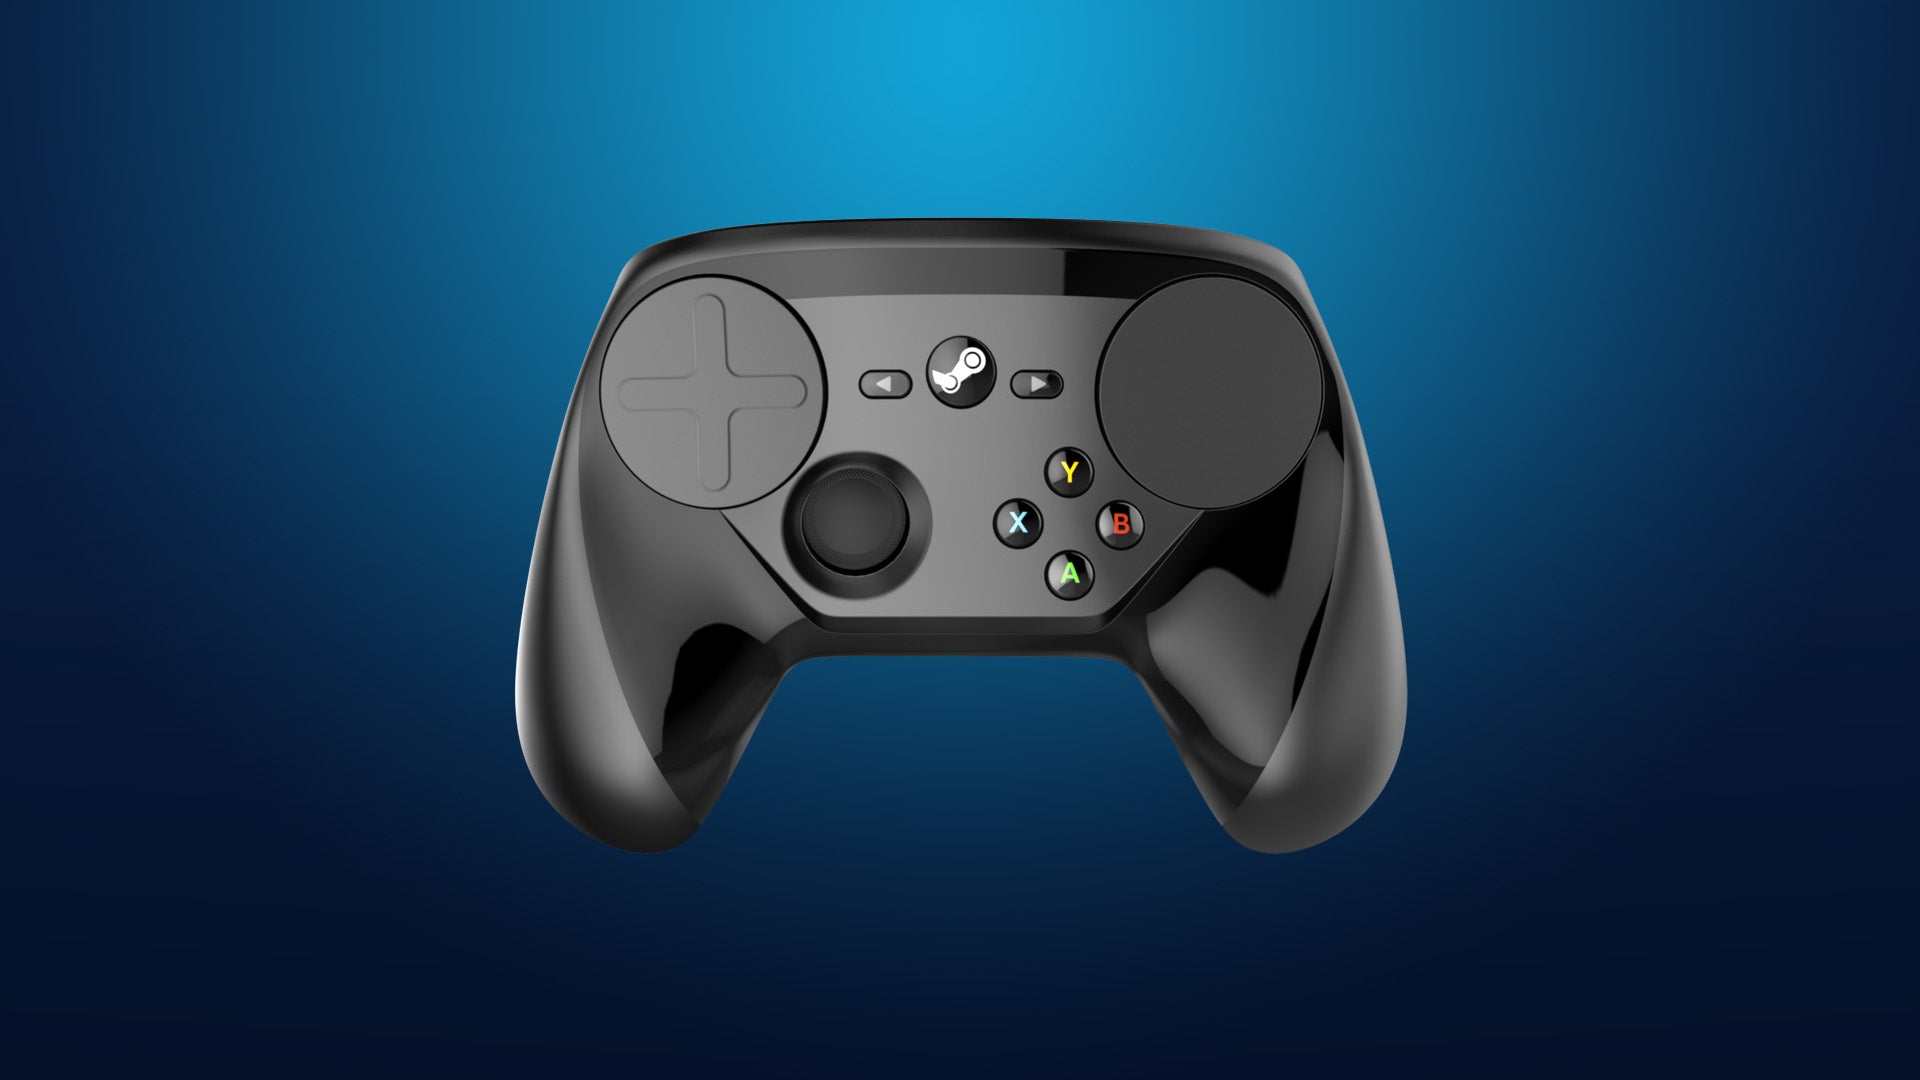 An image showing a Steam Controller.